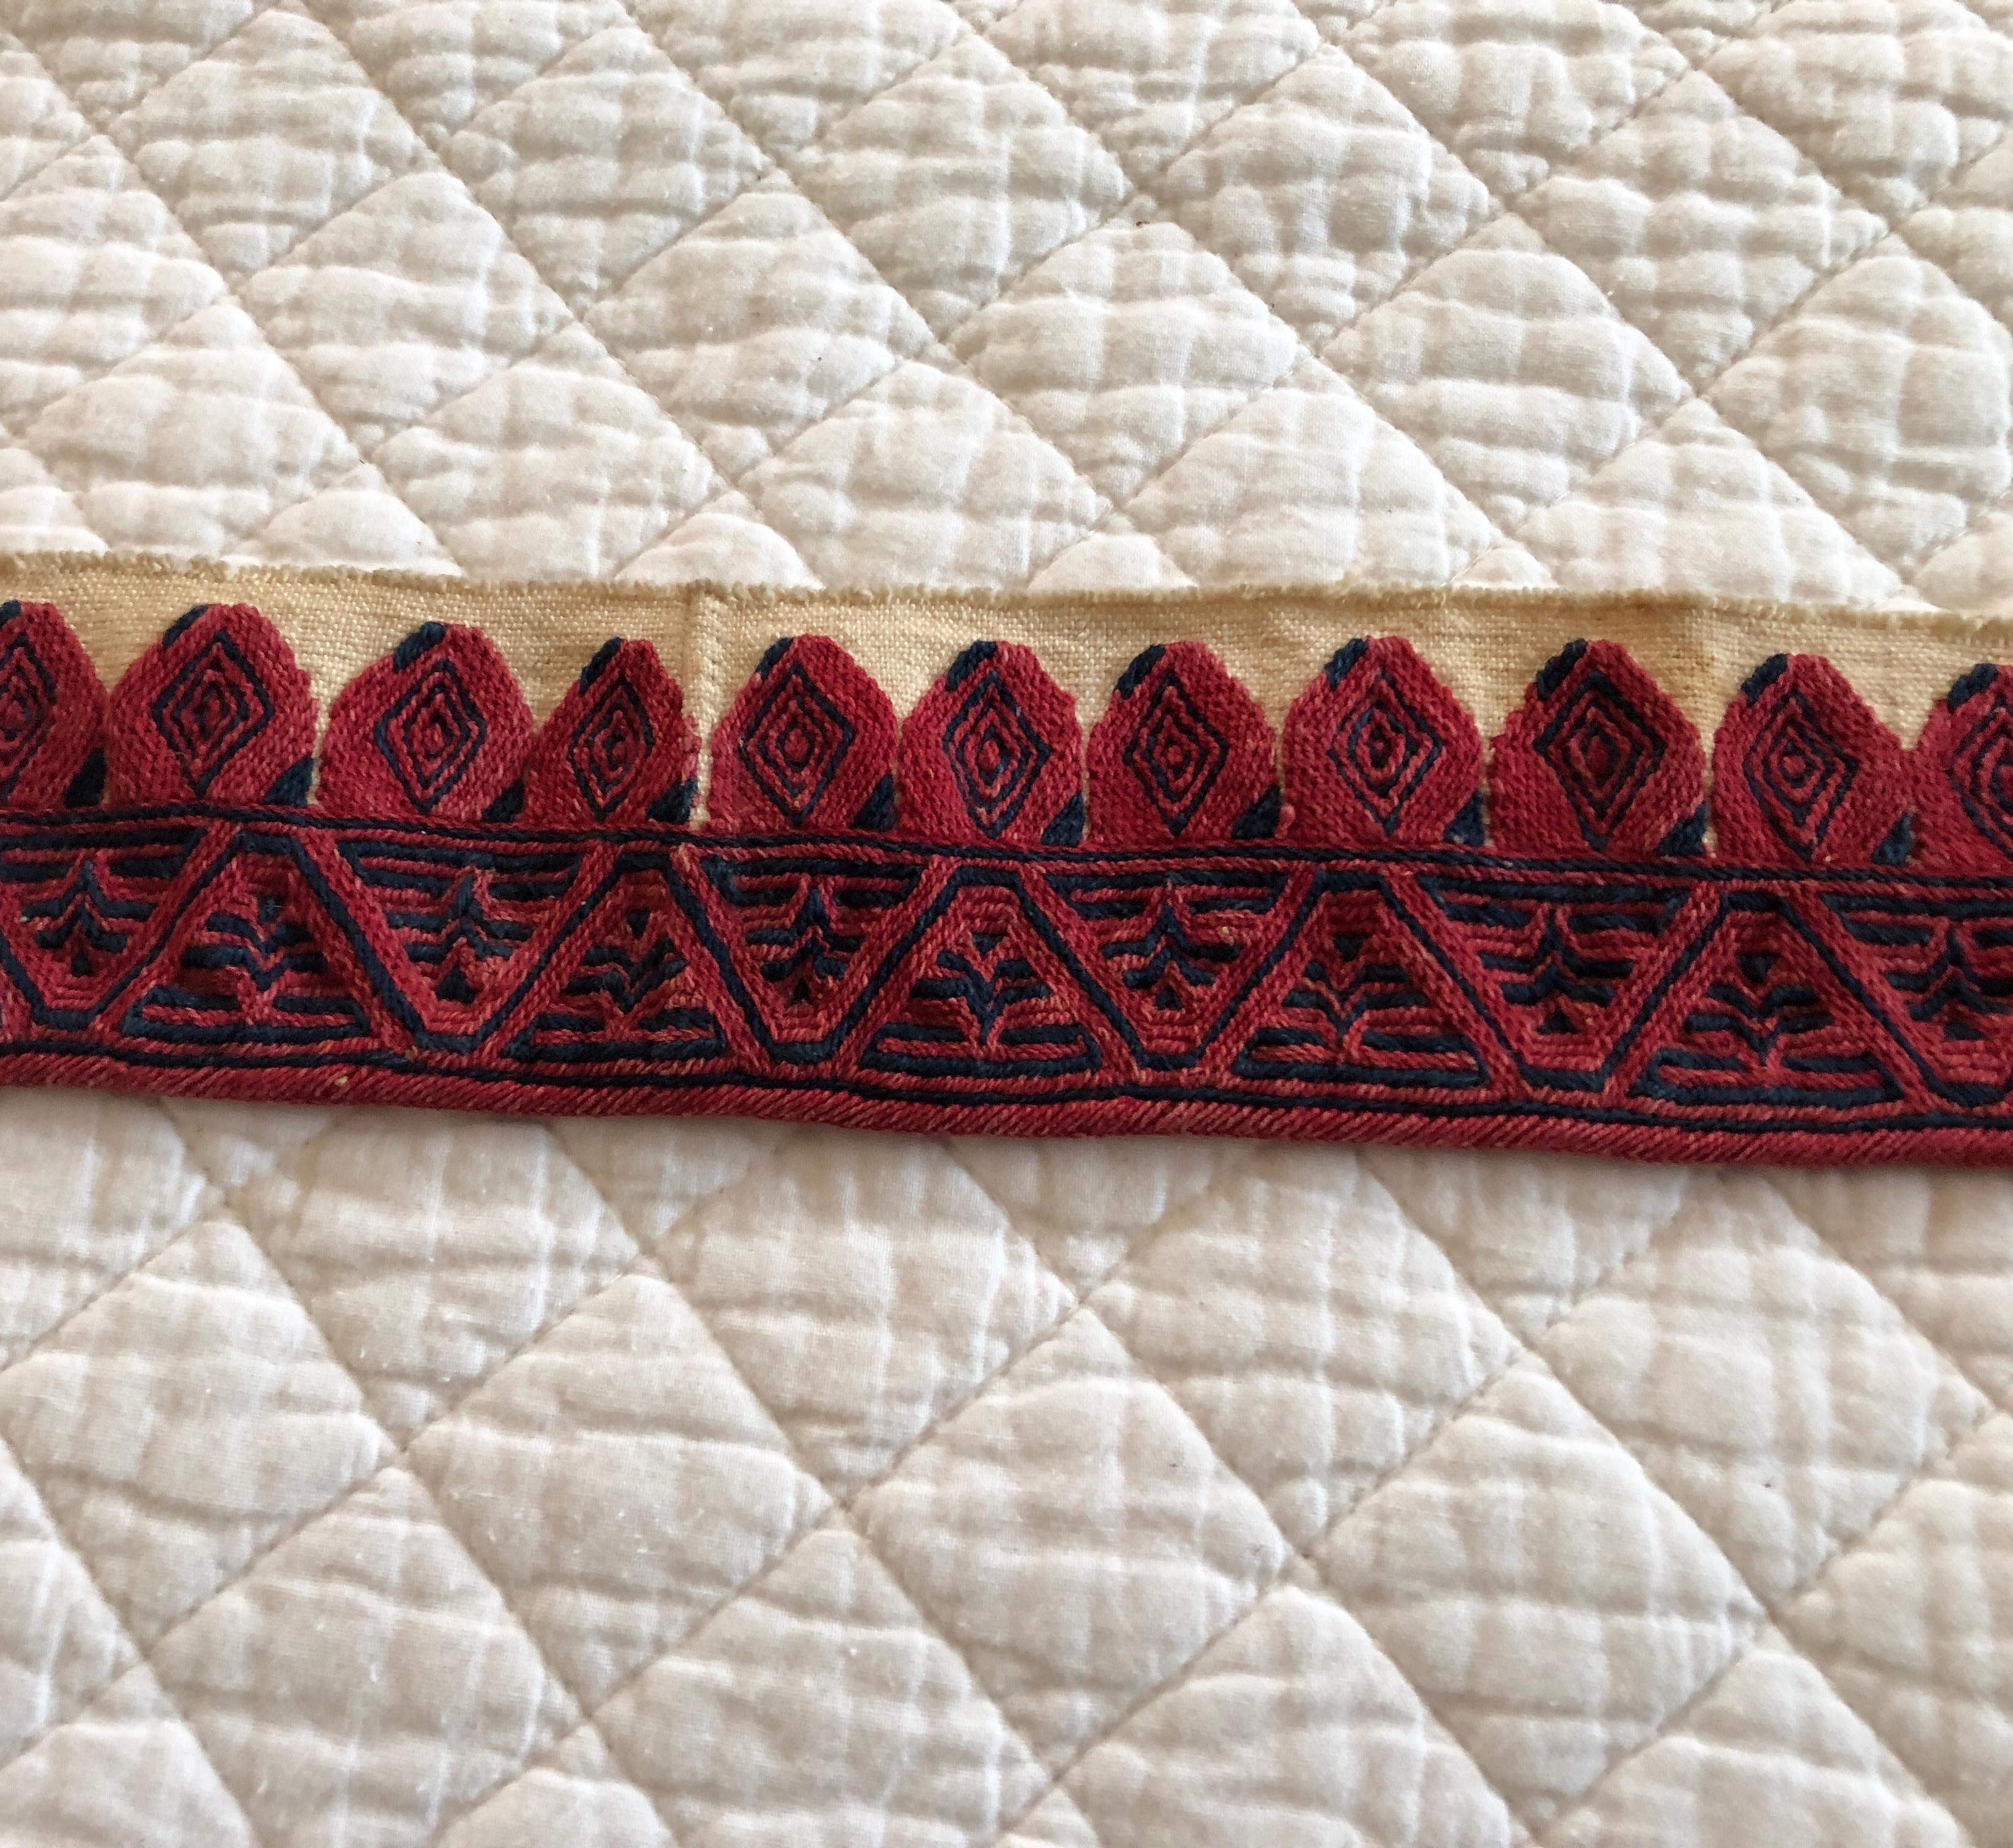 Antique red and blue woven decorative linen trim.
Ideal for pillows or upholstery.
Size: 2